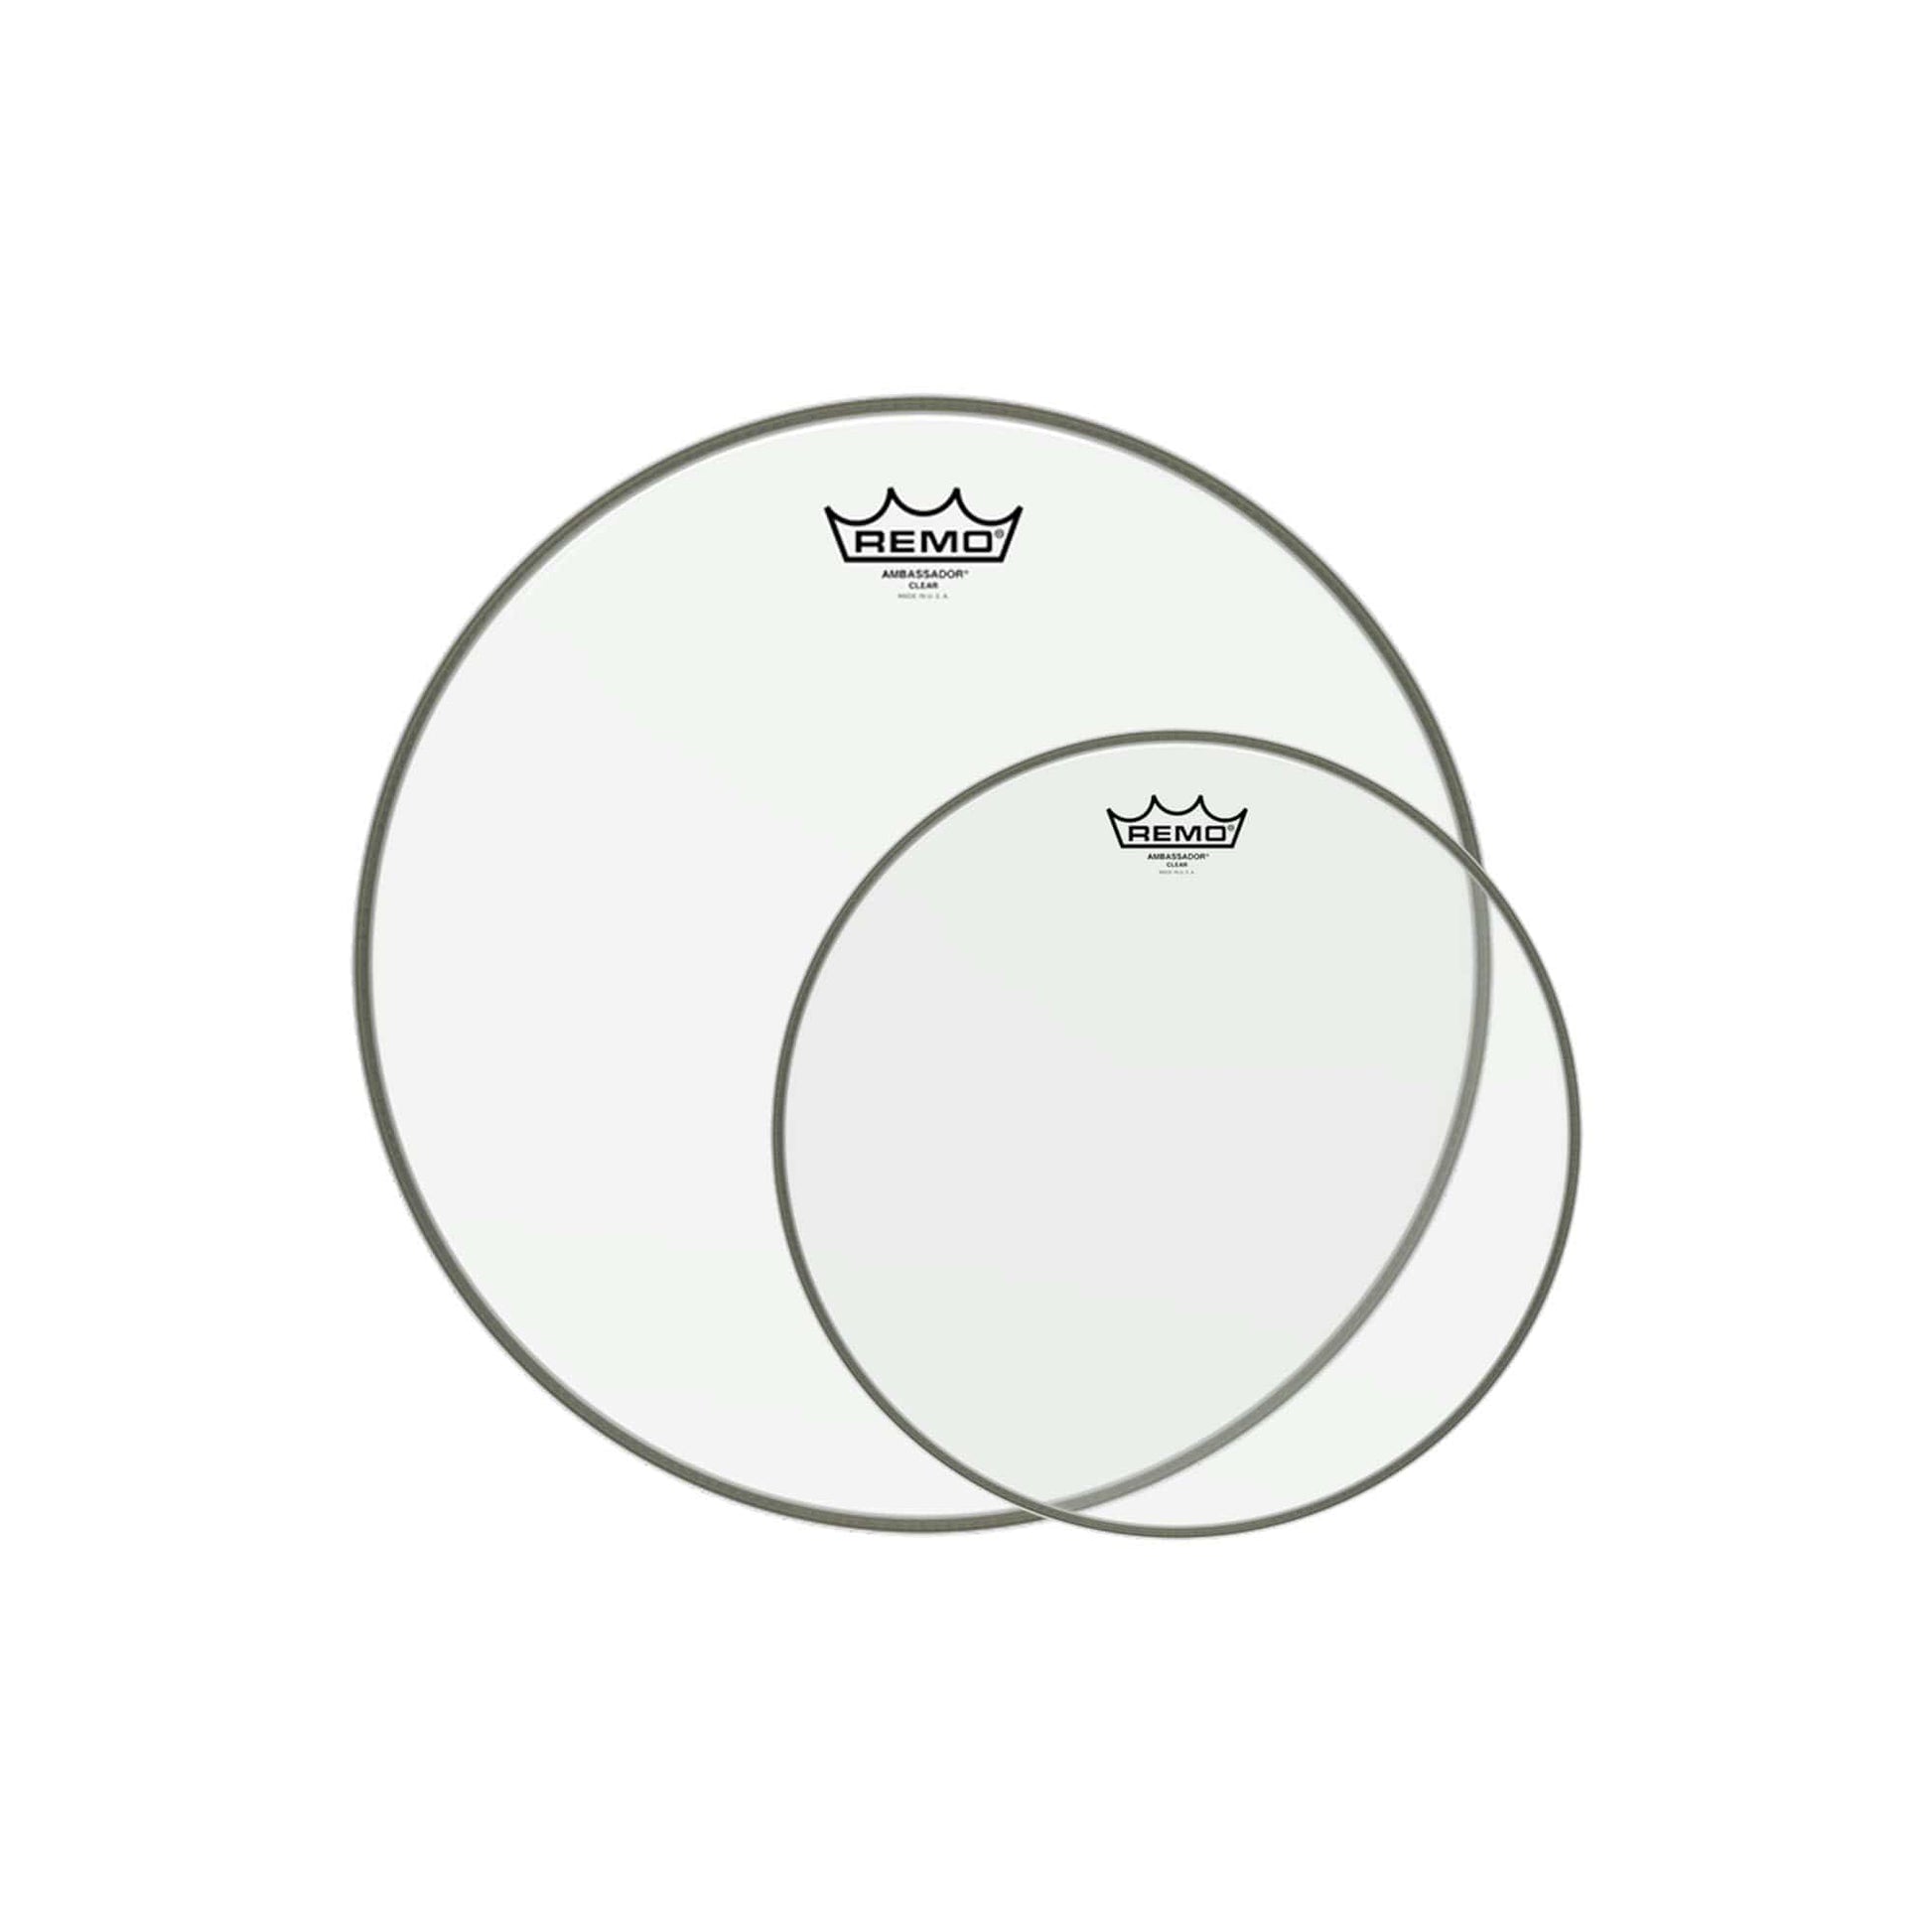 Remo 12/16" Ambassador Clear Drumhead (2 Pack Bundle) Drums and Percussion / Parts and Accessories / Heads